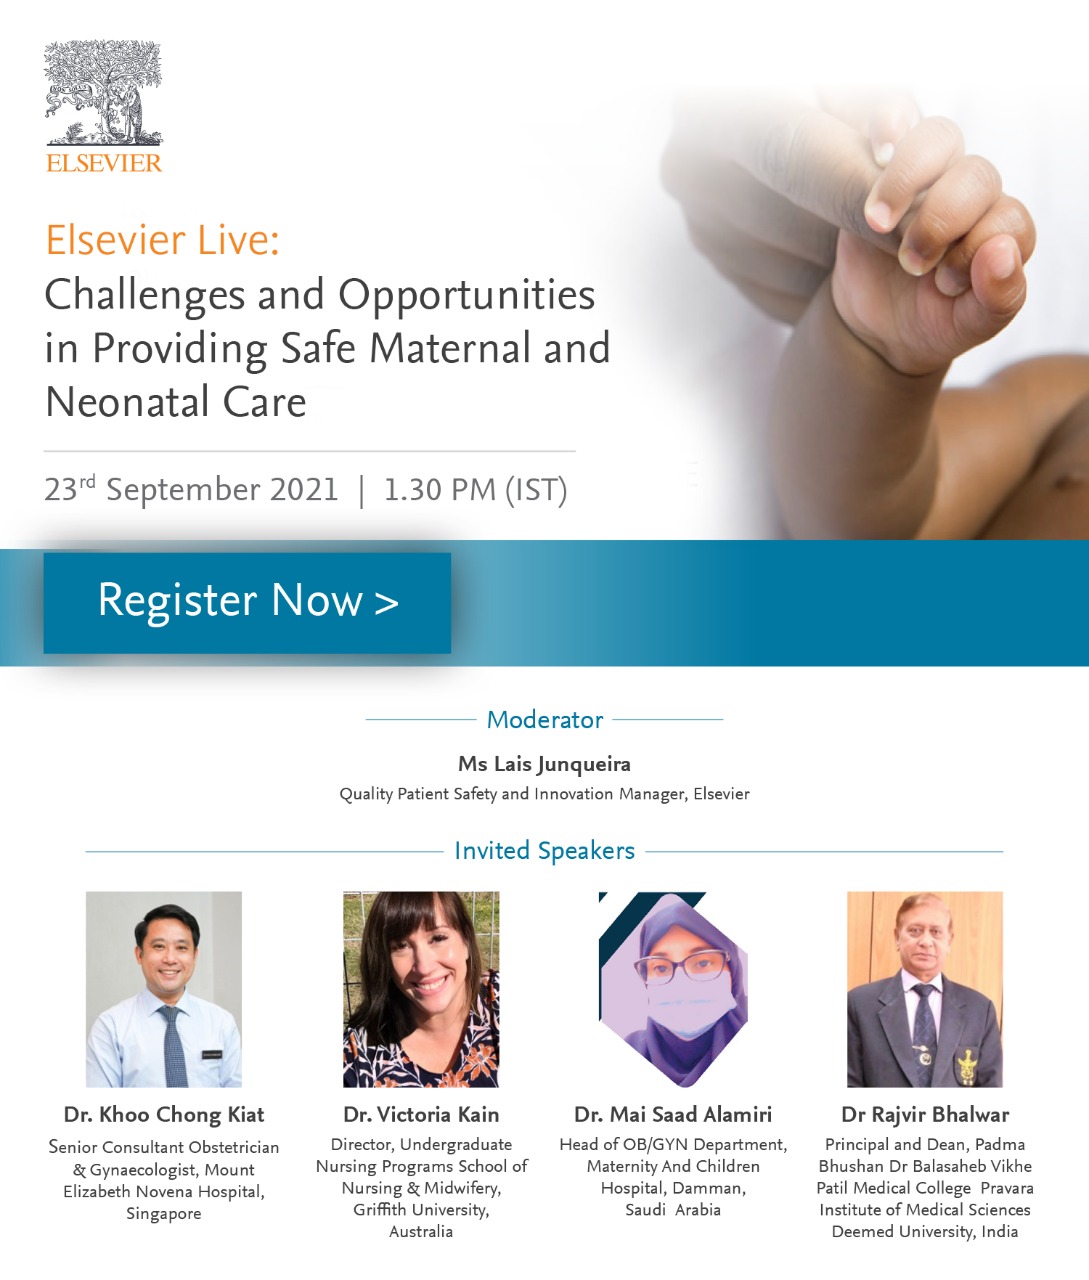 Webinar on Challenges and Opportunities in Providing Safe Maternal and Neonatal Care